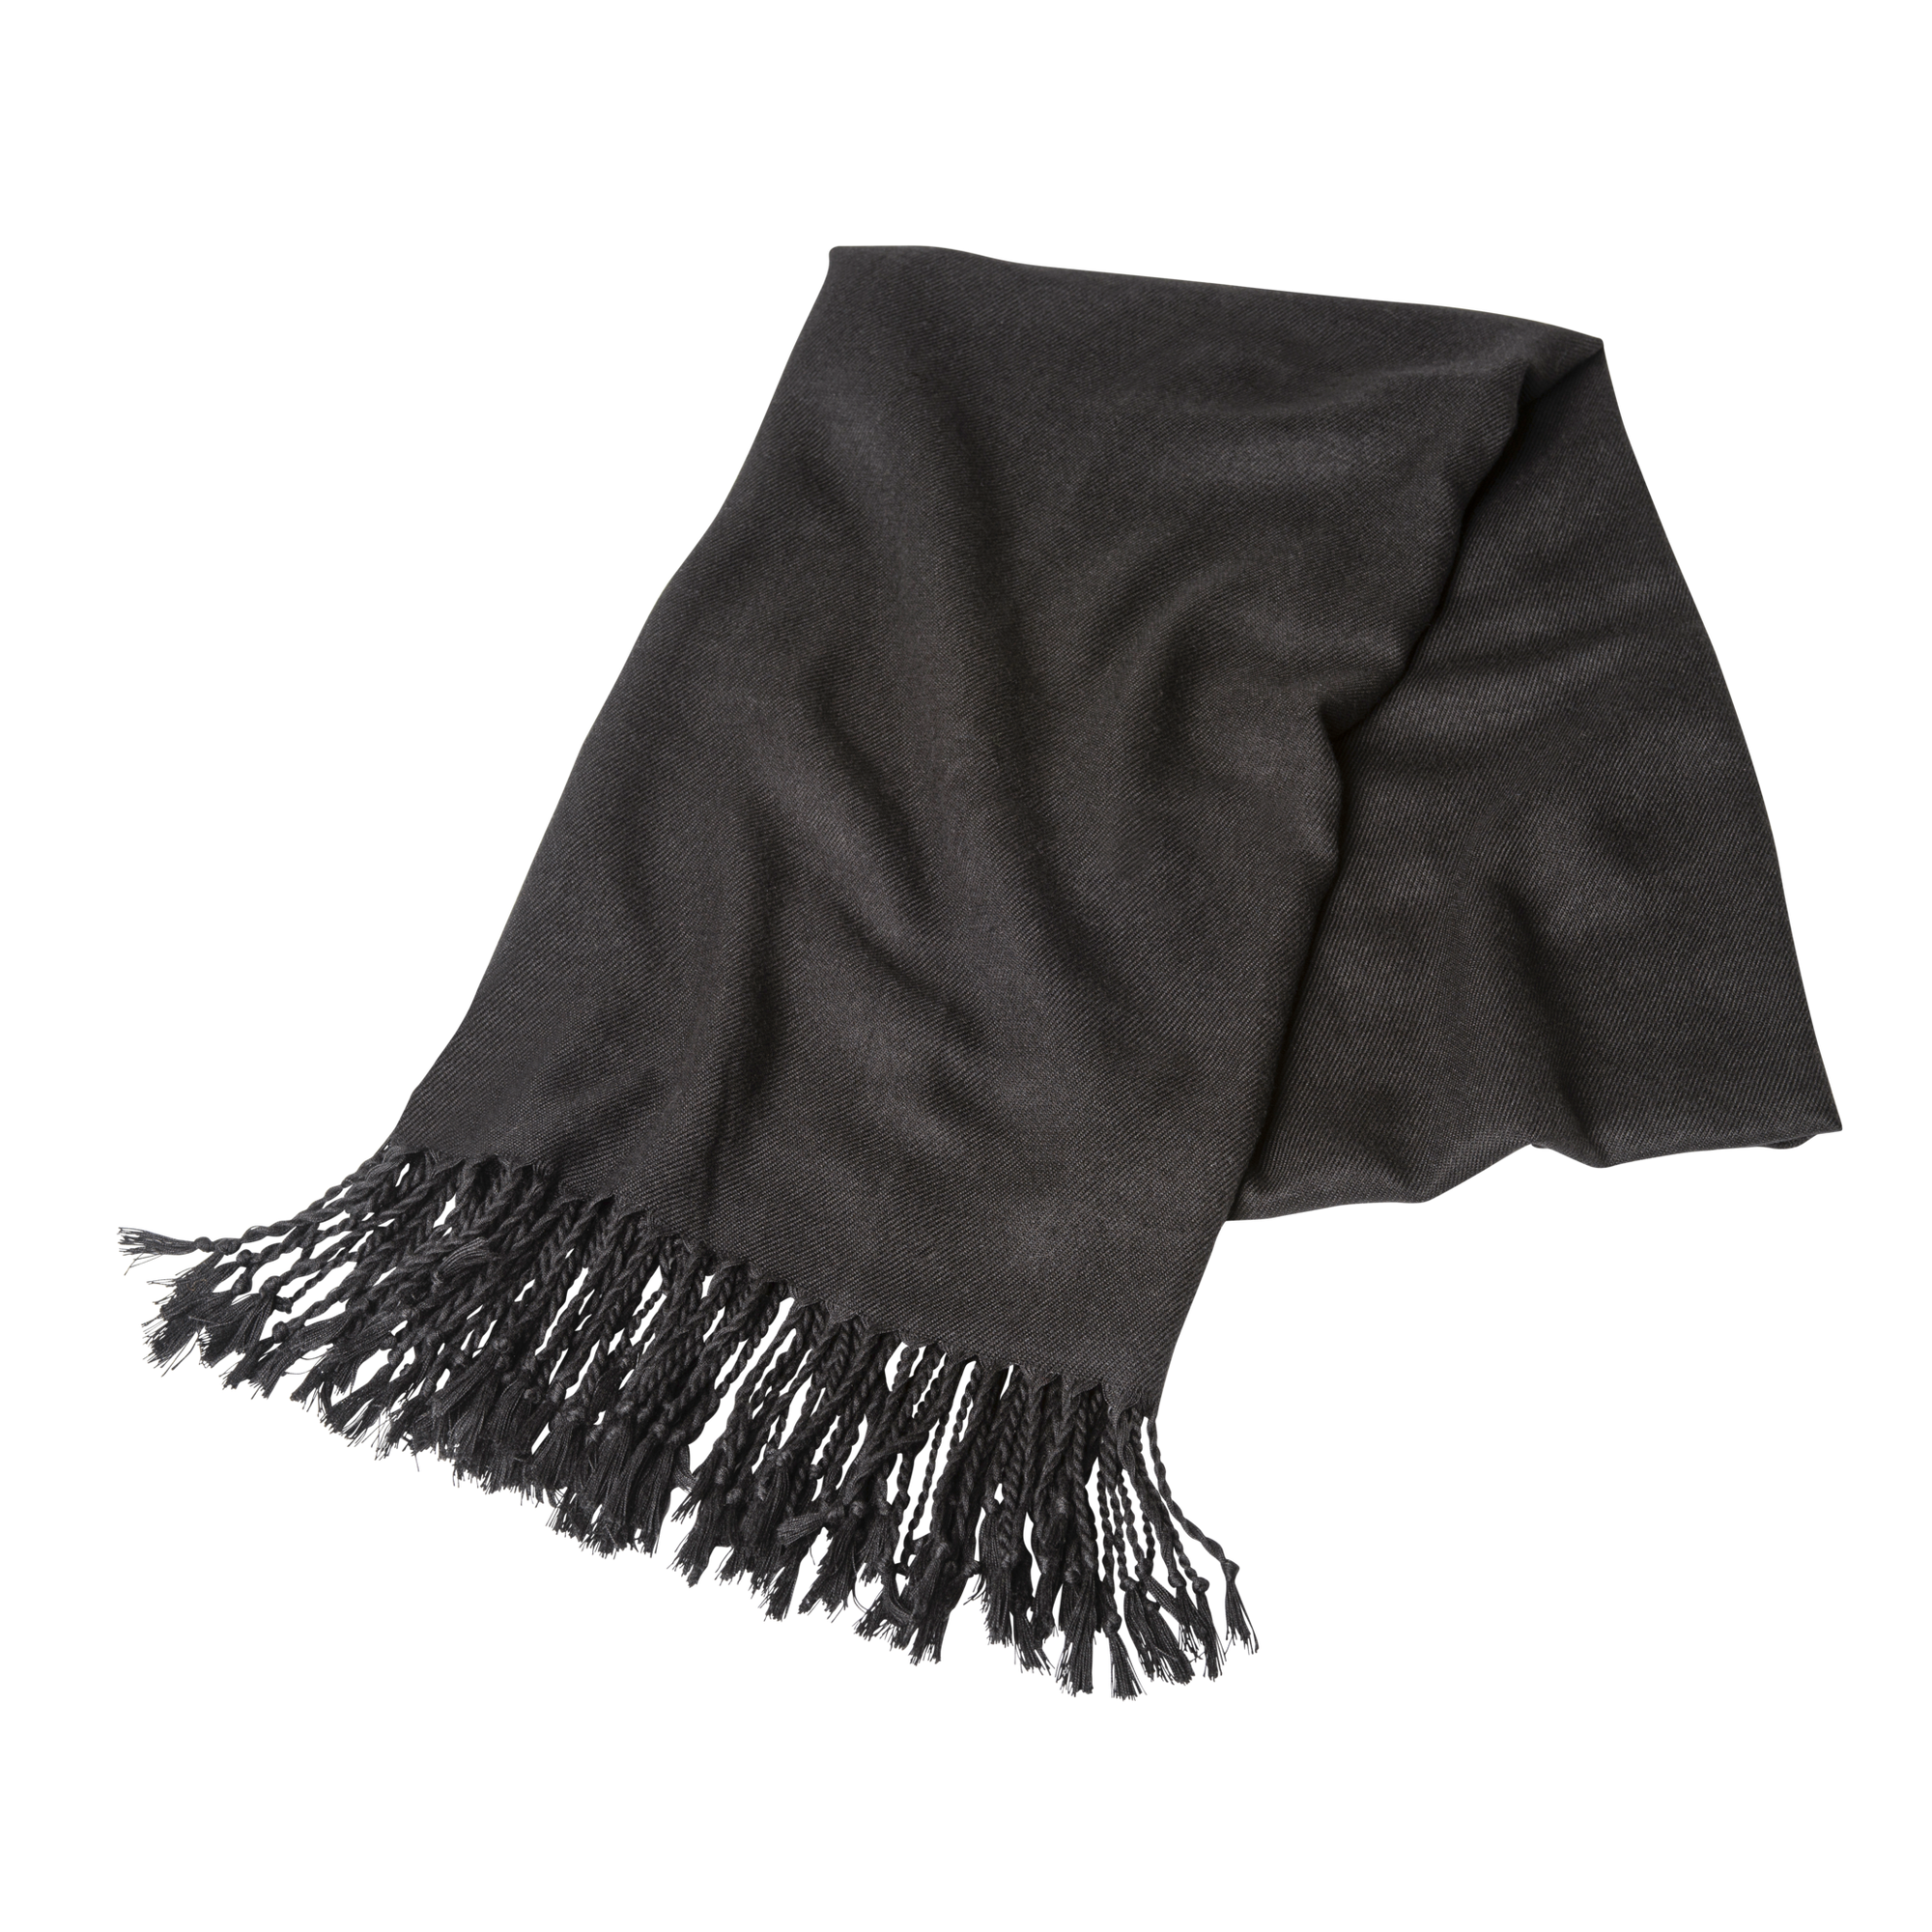 Wedding Event | Black Pashmina Shawl Rental - Weather or Not Accessories